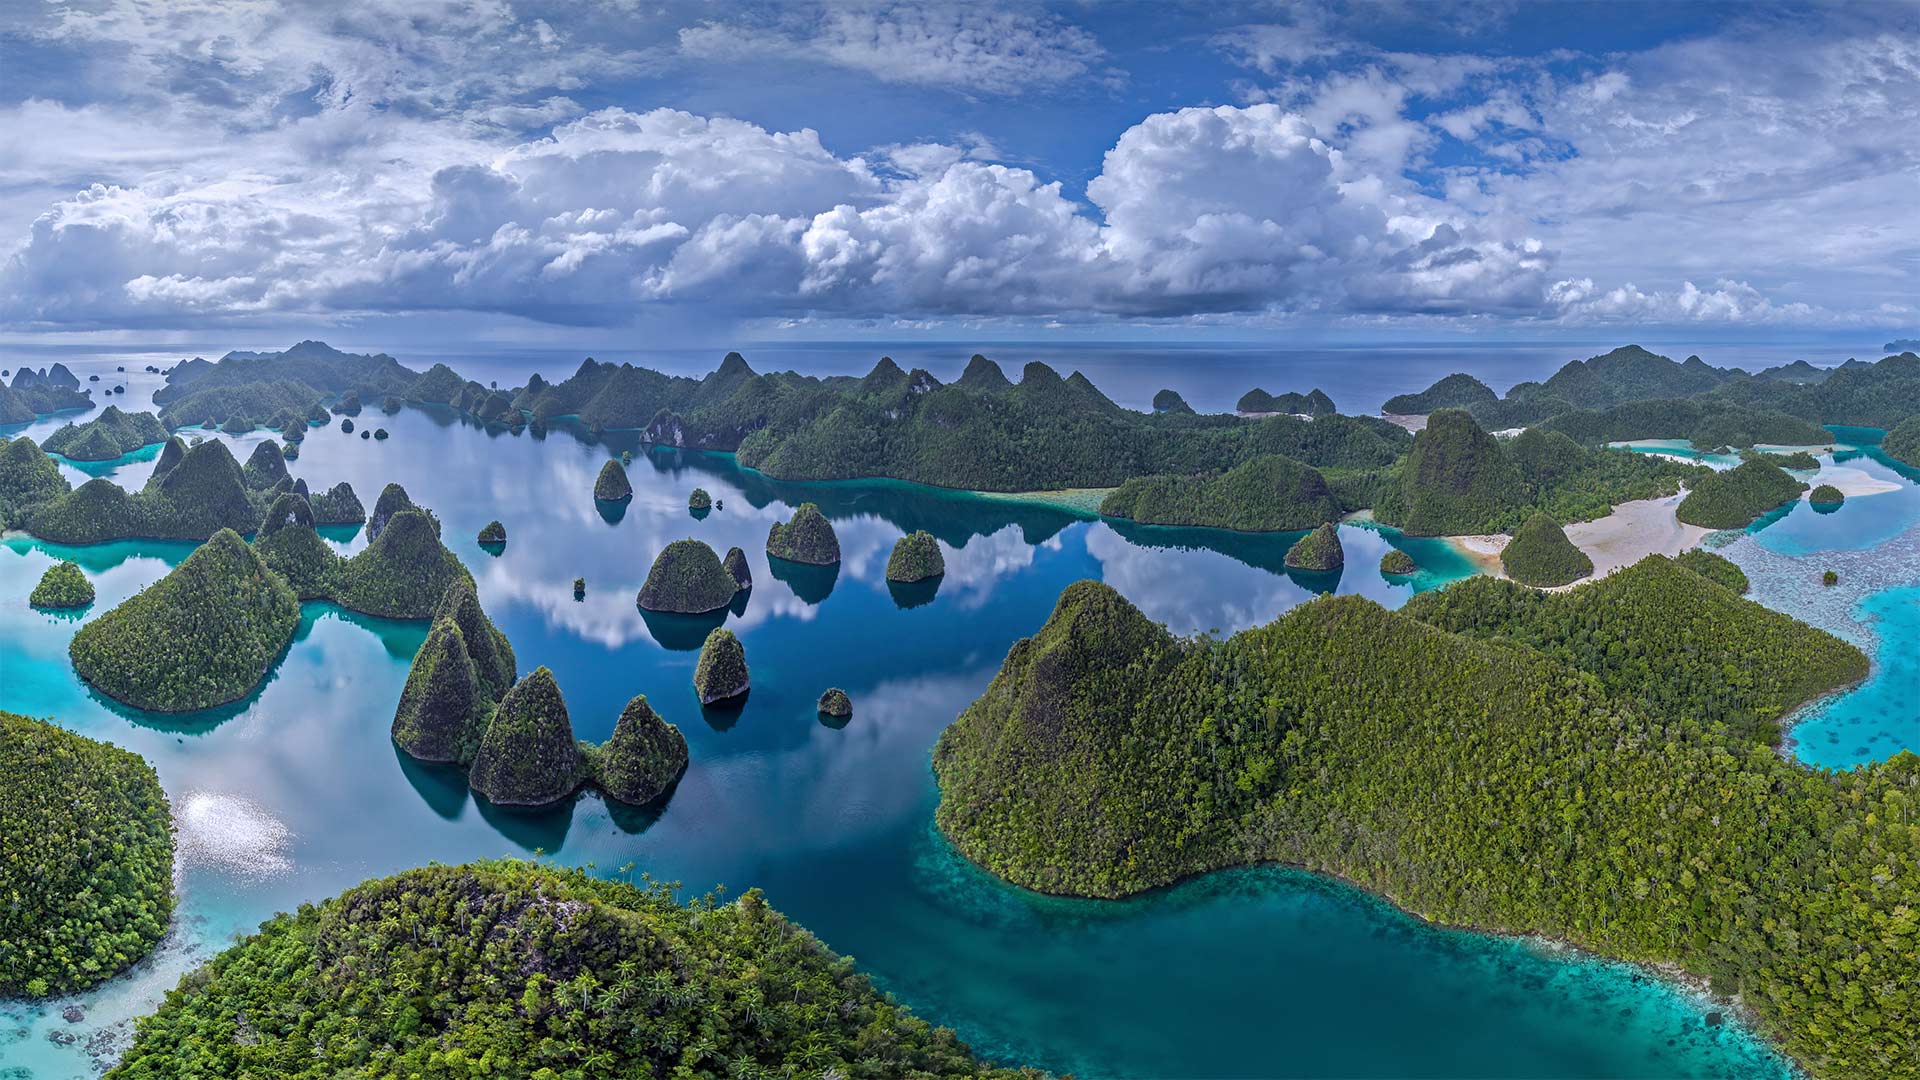 Raja Ampat, an archipelago in Indonesia - Amazing Aerial Agency/Offset by Shutterstock)